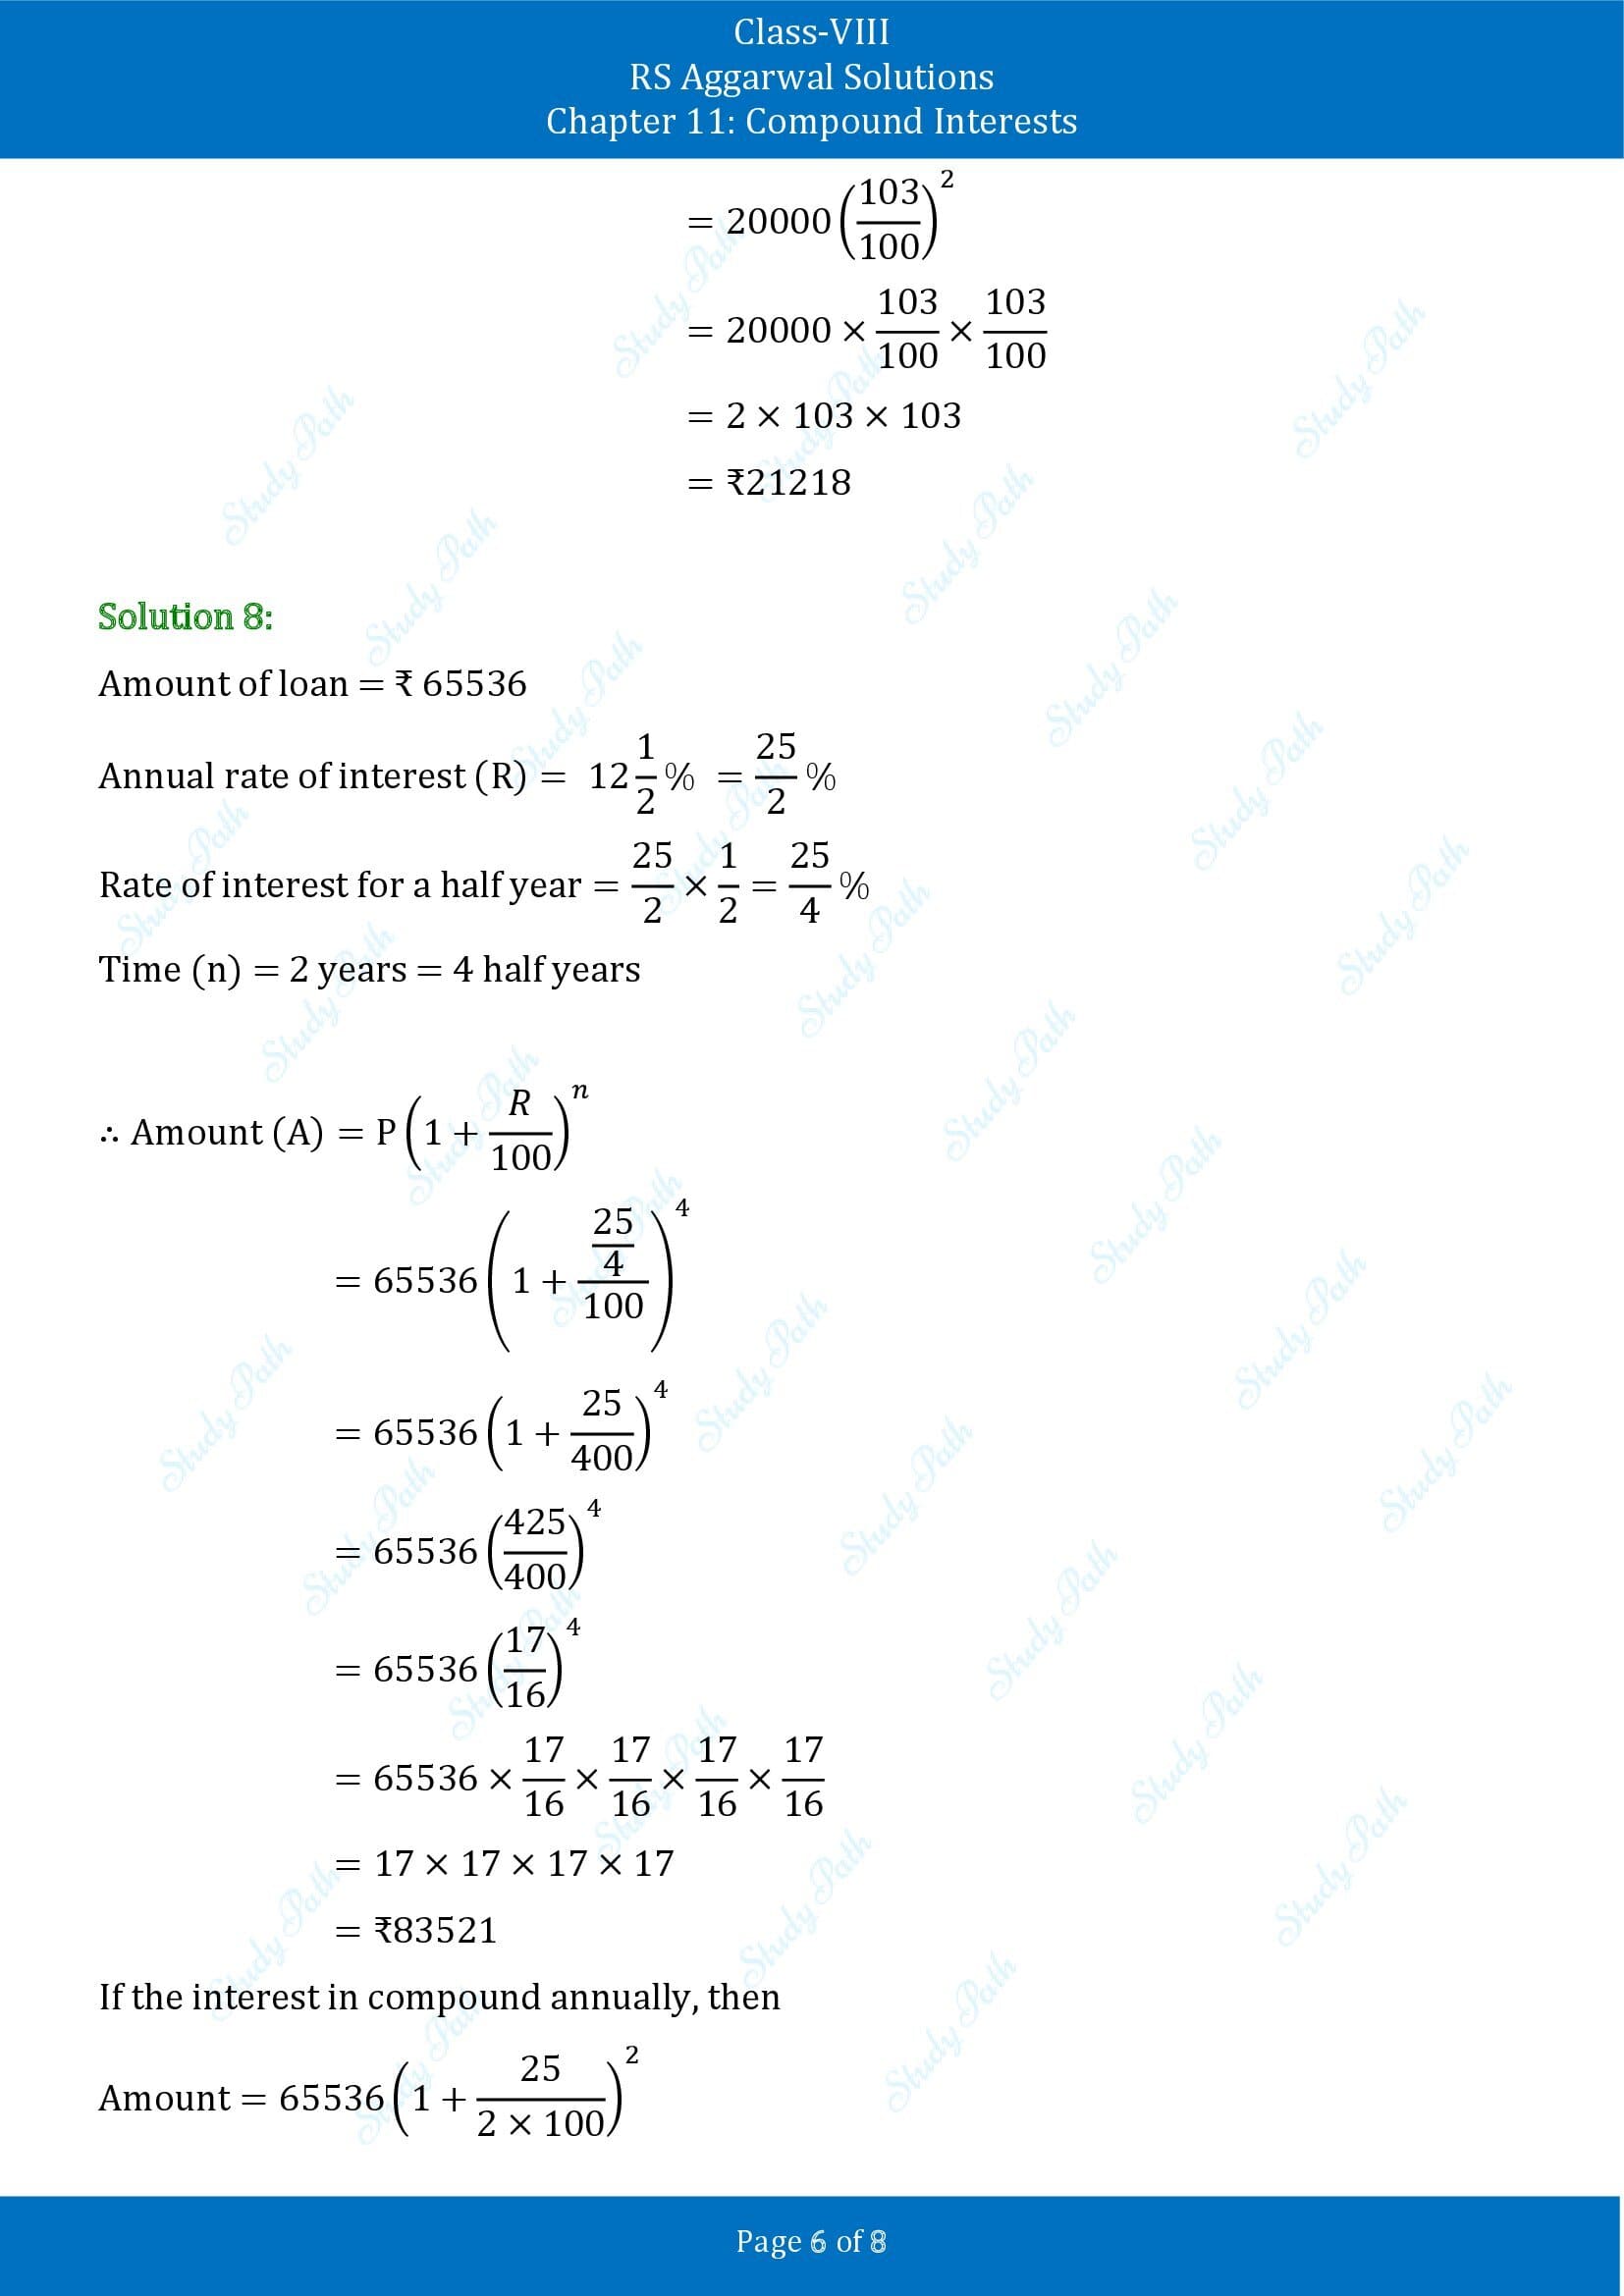 RS Aggarwal Solutions Class 8 Chapter 11 Compound Interests Exercise 11C 006